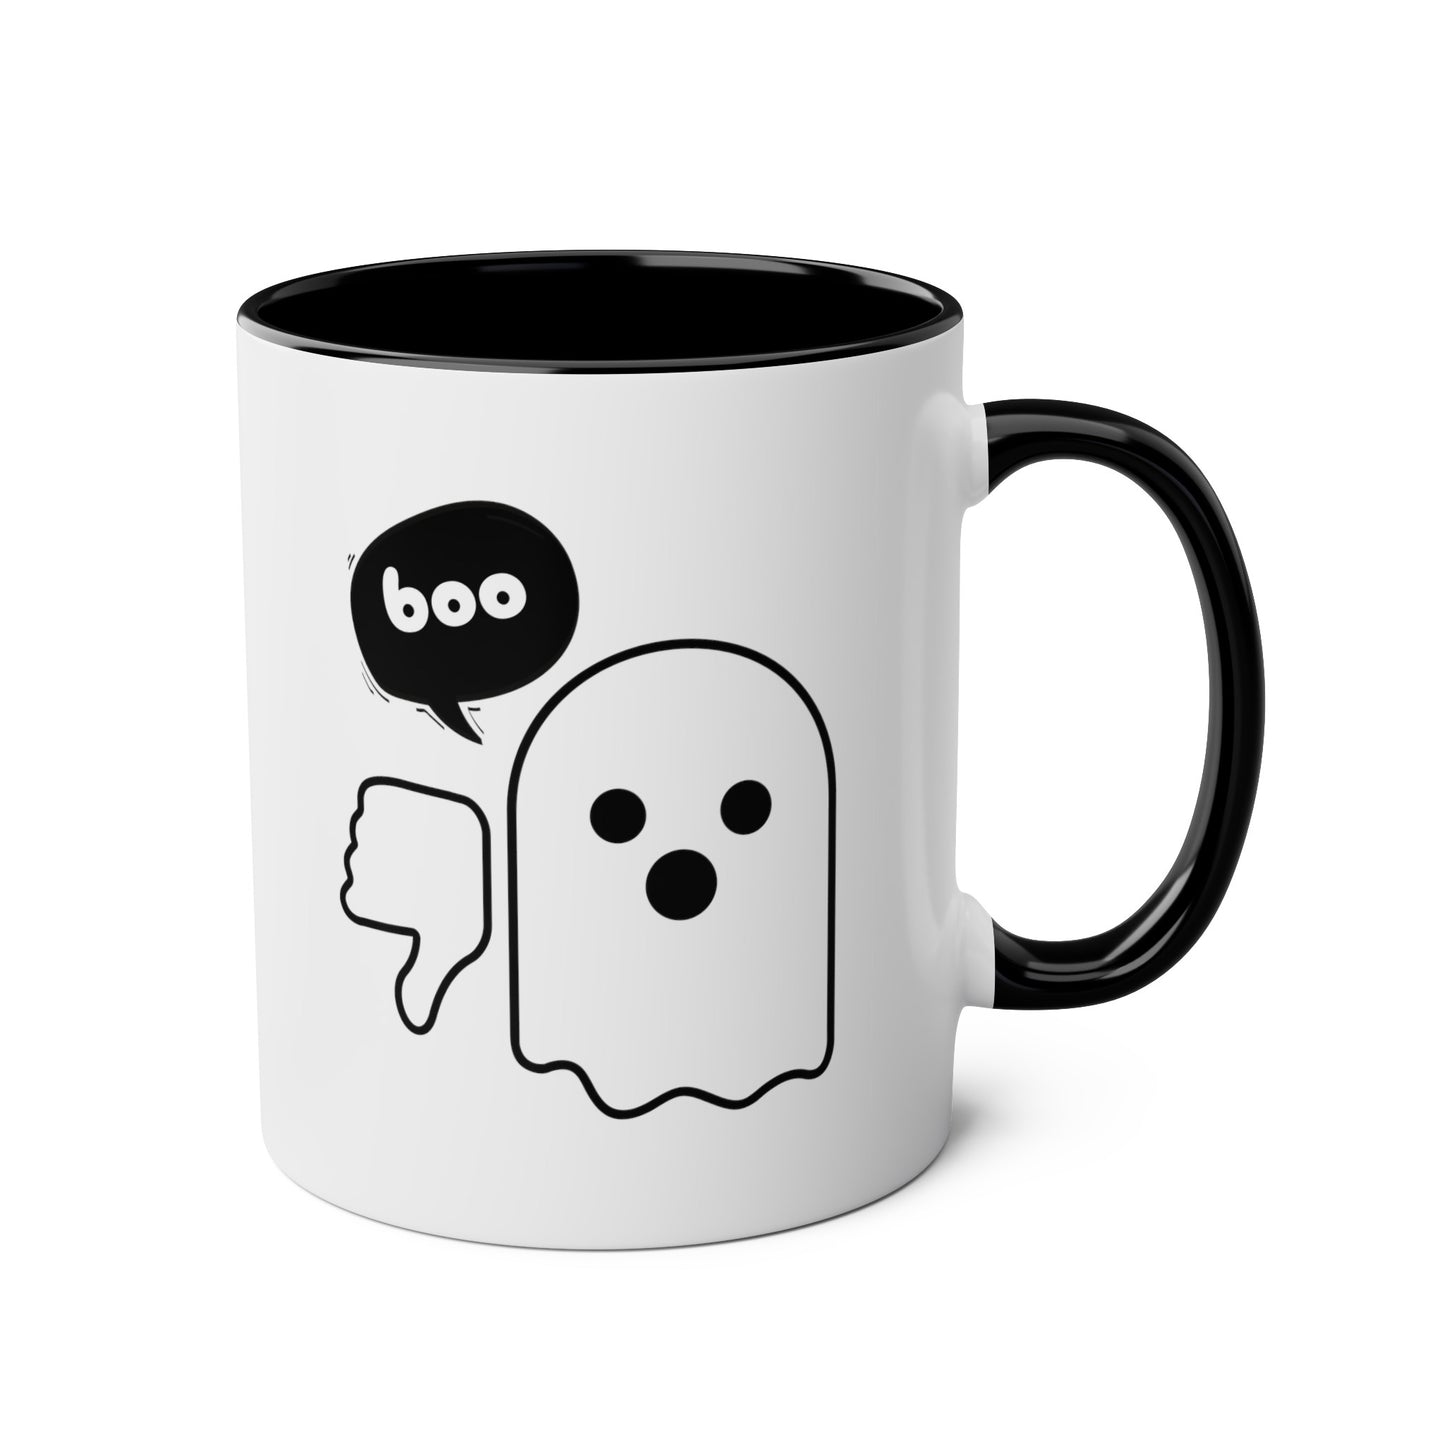 Boo Ghost Of Disapproval 11oz white with black accent funny large coffee mug gift for halloween spooky season friend disapproving waveywares wavey wares wavywares wavy wares